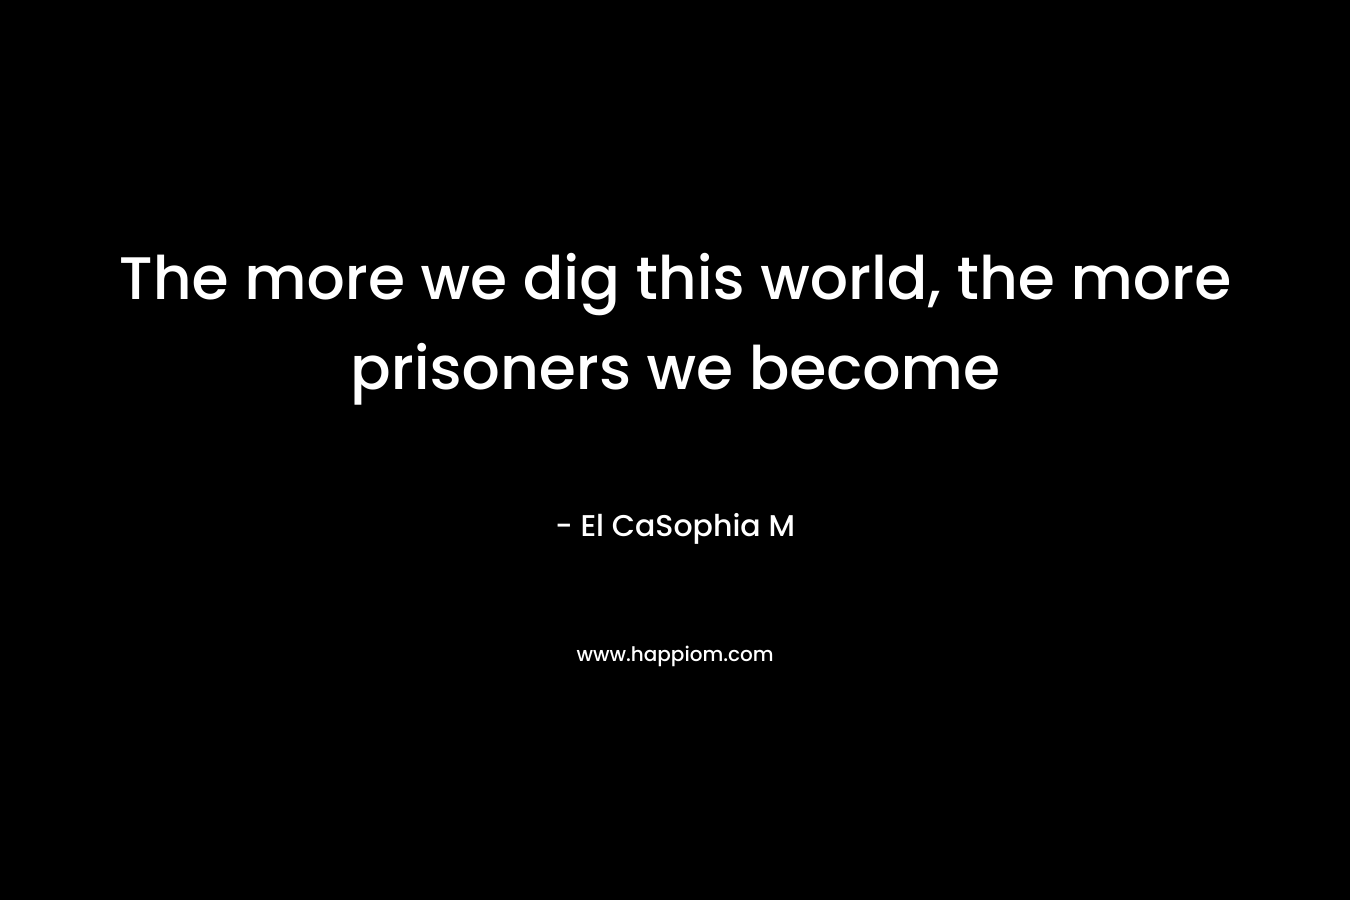 The more we dig this world, the more prisoners we become